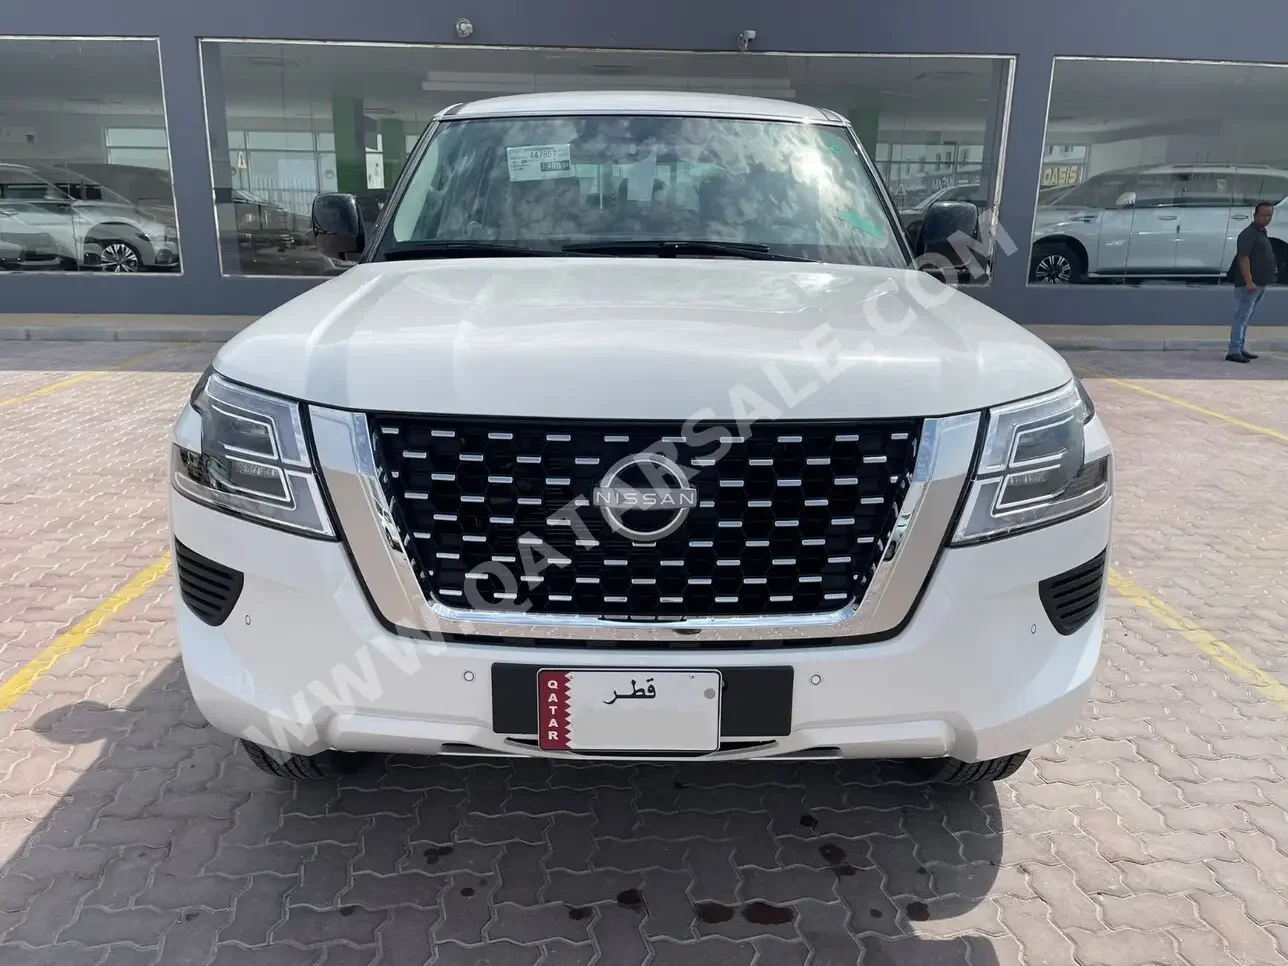 Nissan  Patrol  XE  2024  Automatic  0 Km  6 Cylinder  Four Wheel Drive (4WD)  SUV  White  With Warranty